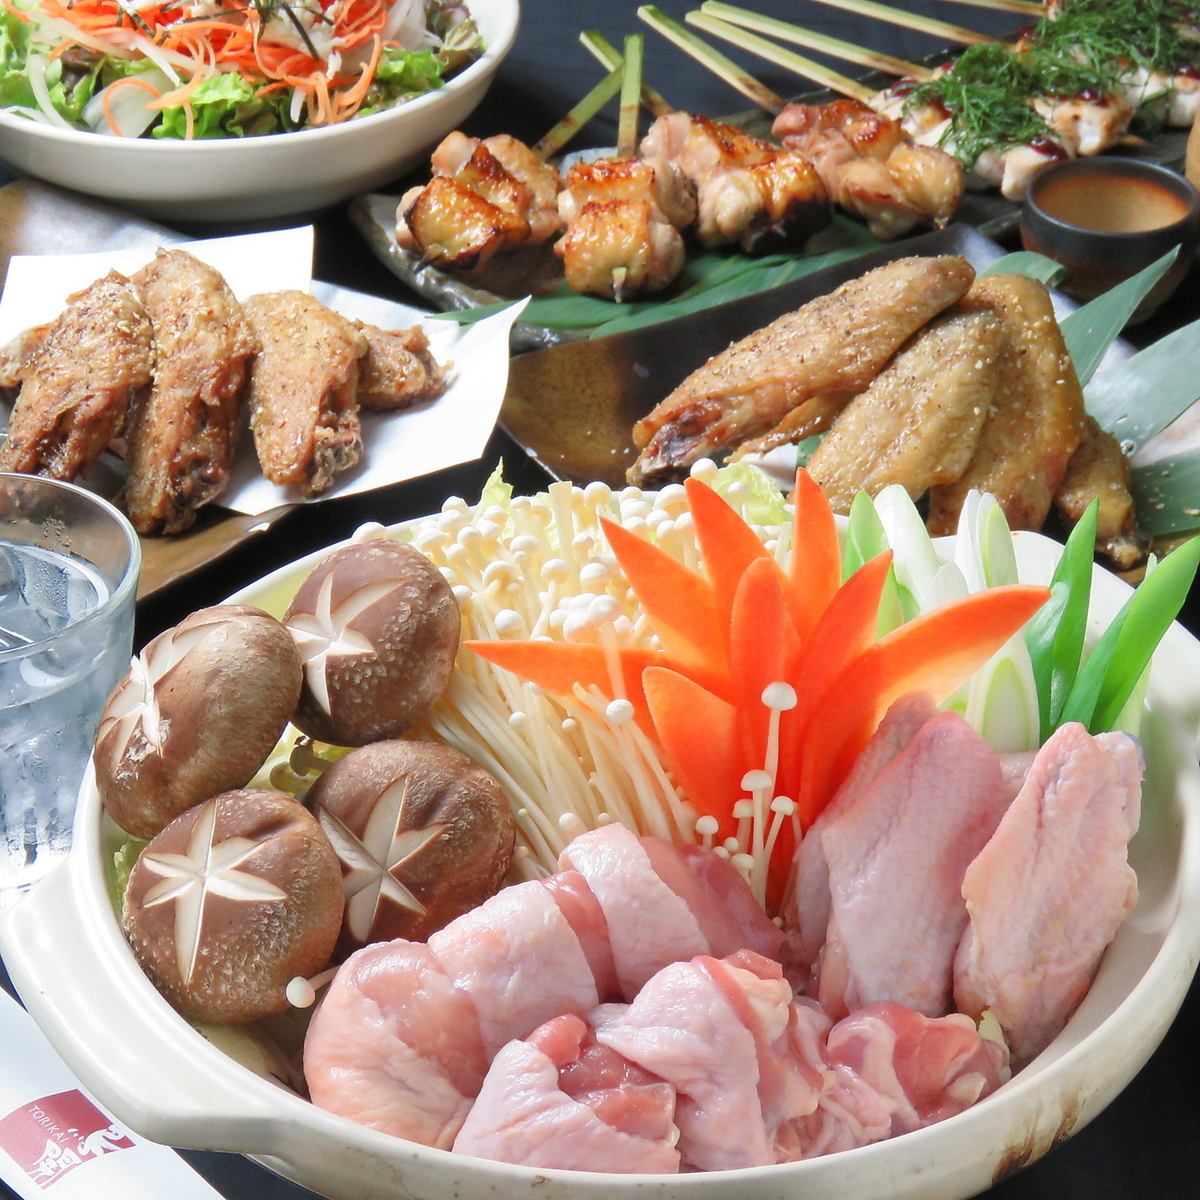 A must-have hotpot course this season★2 hours of all-you-can-drink + 8 dishes for 4,000 yen♪